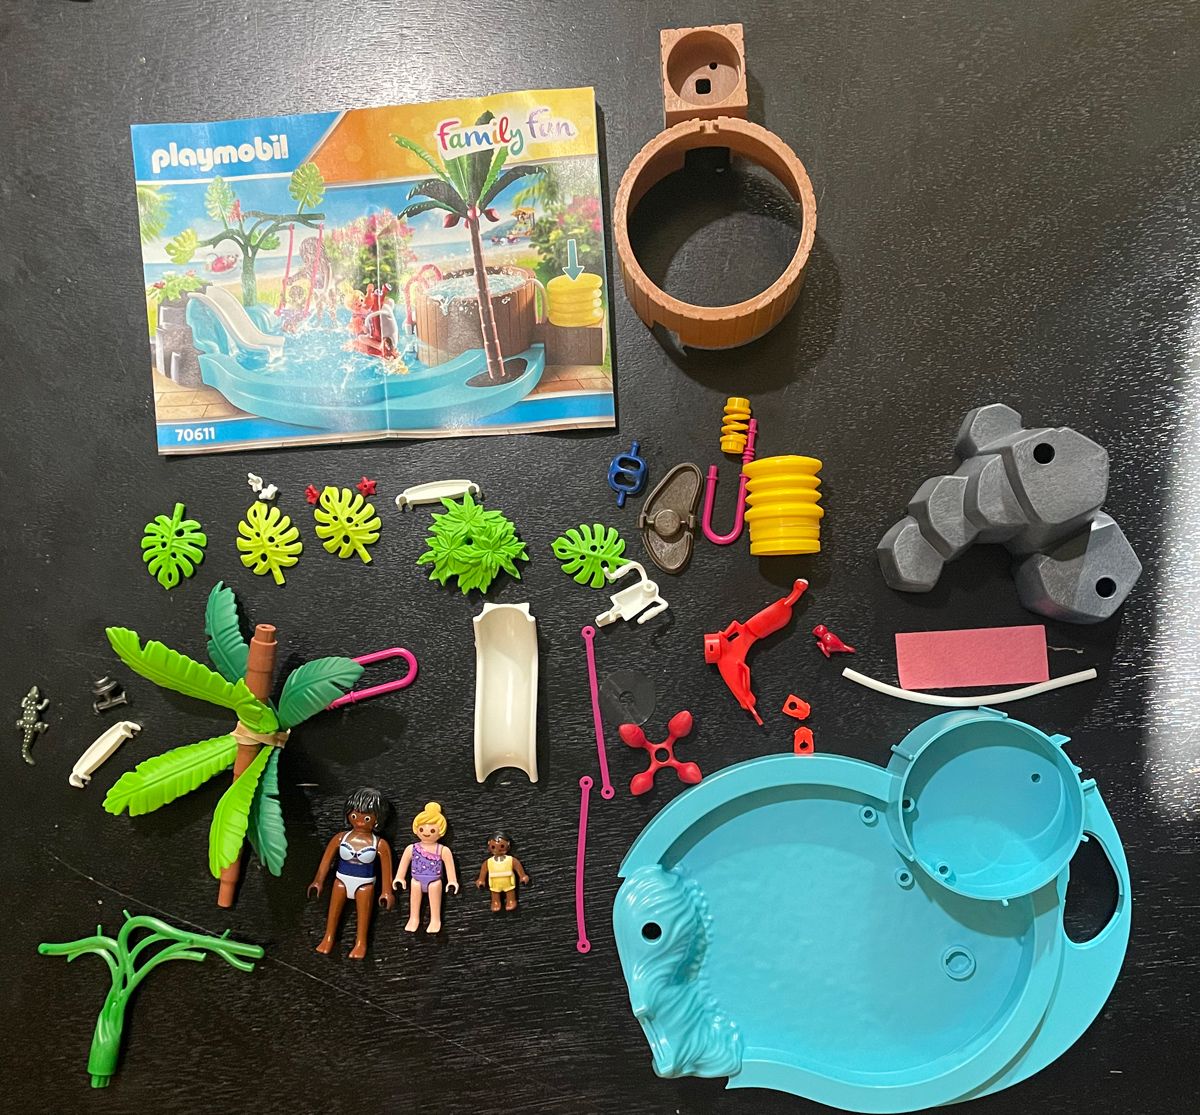 Playmobil Playland: 'Water Park' Themed Sets For Summer Fun! - GeekDad